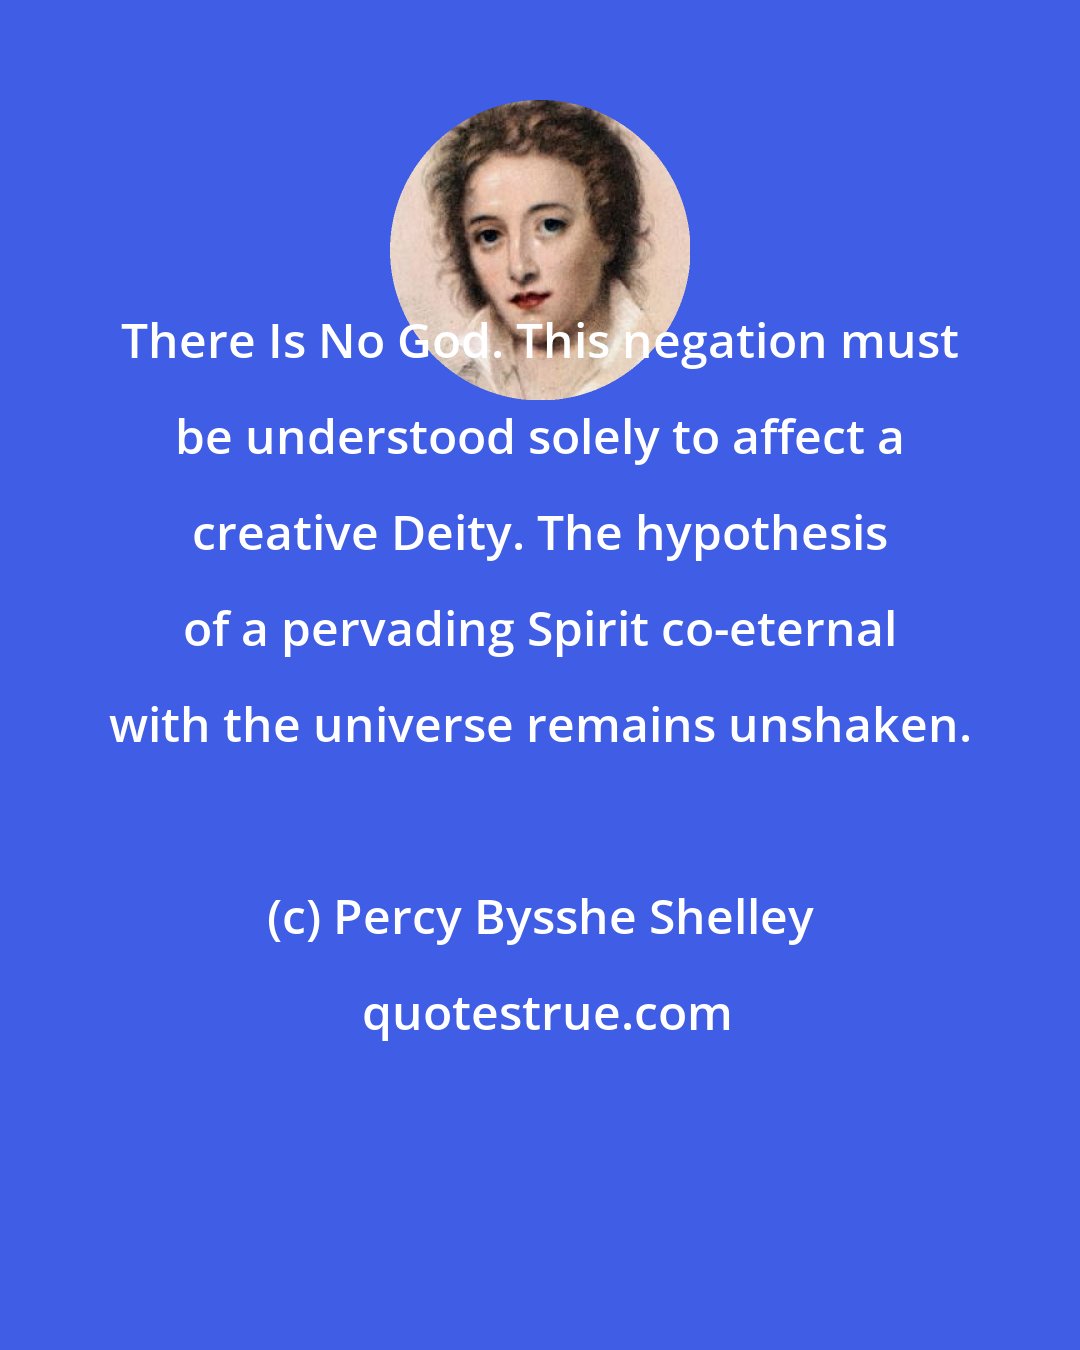 Percy Bysshe Shelley: There Is No God. This negation must be understood solely to affect a creative Deity. The hypothesis of a pervading Spirit co-eternal with the universe remains unshaken.